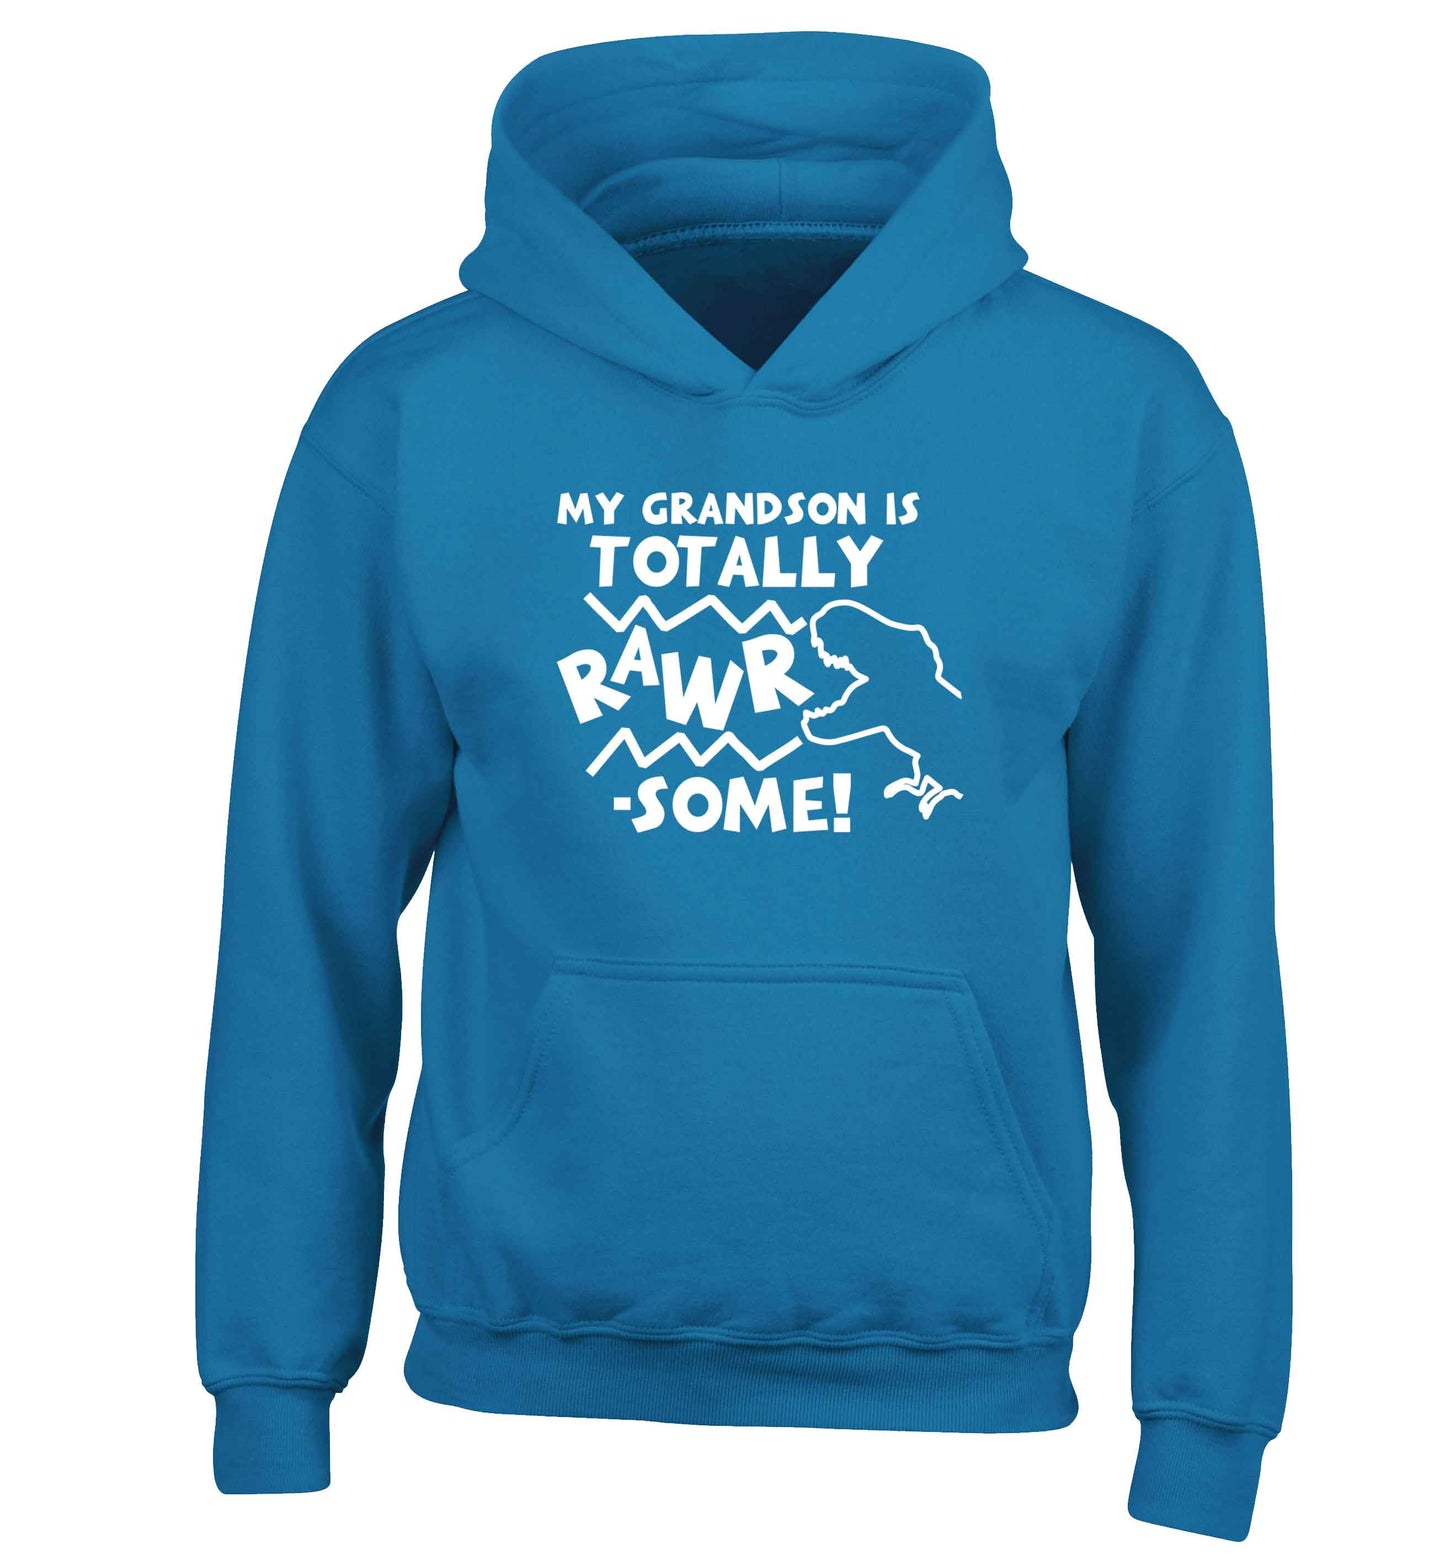 My grandson is totally rawrsome children's blue hoodie 12-13 Years